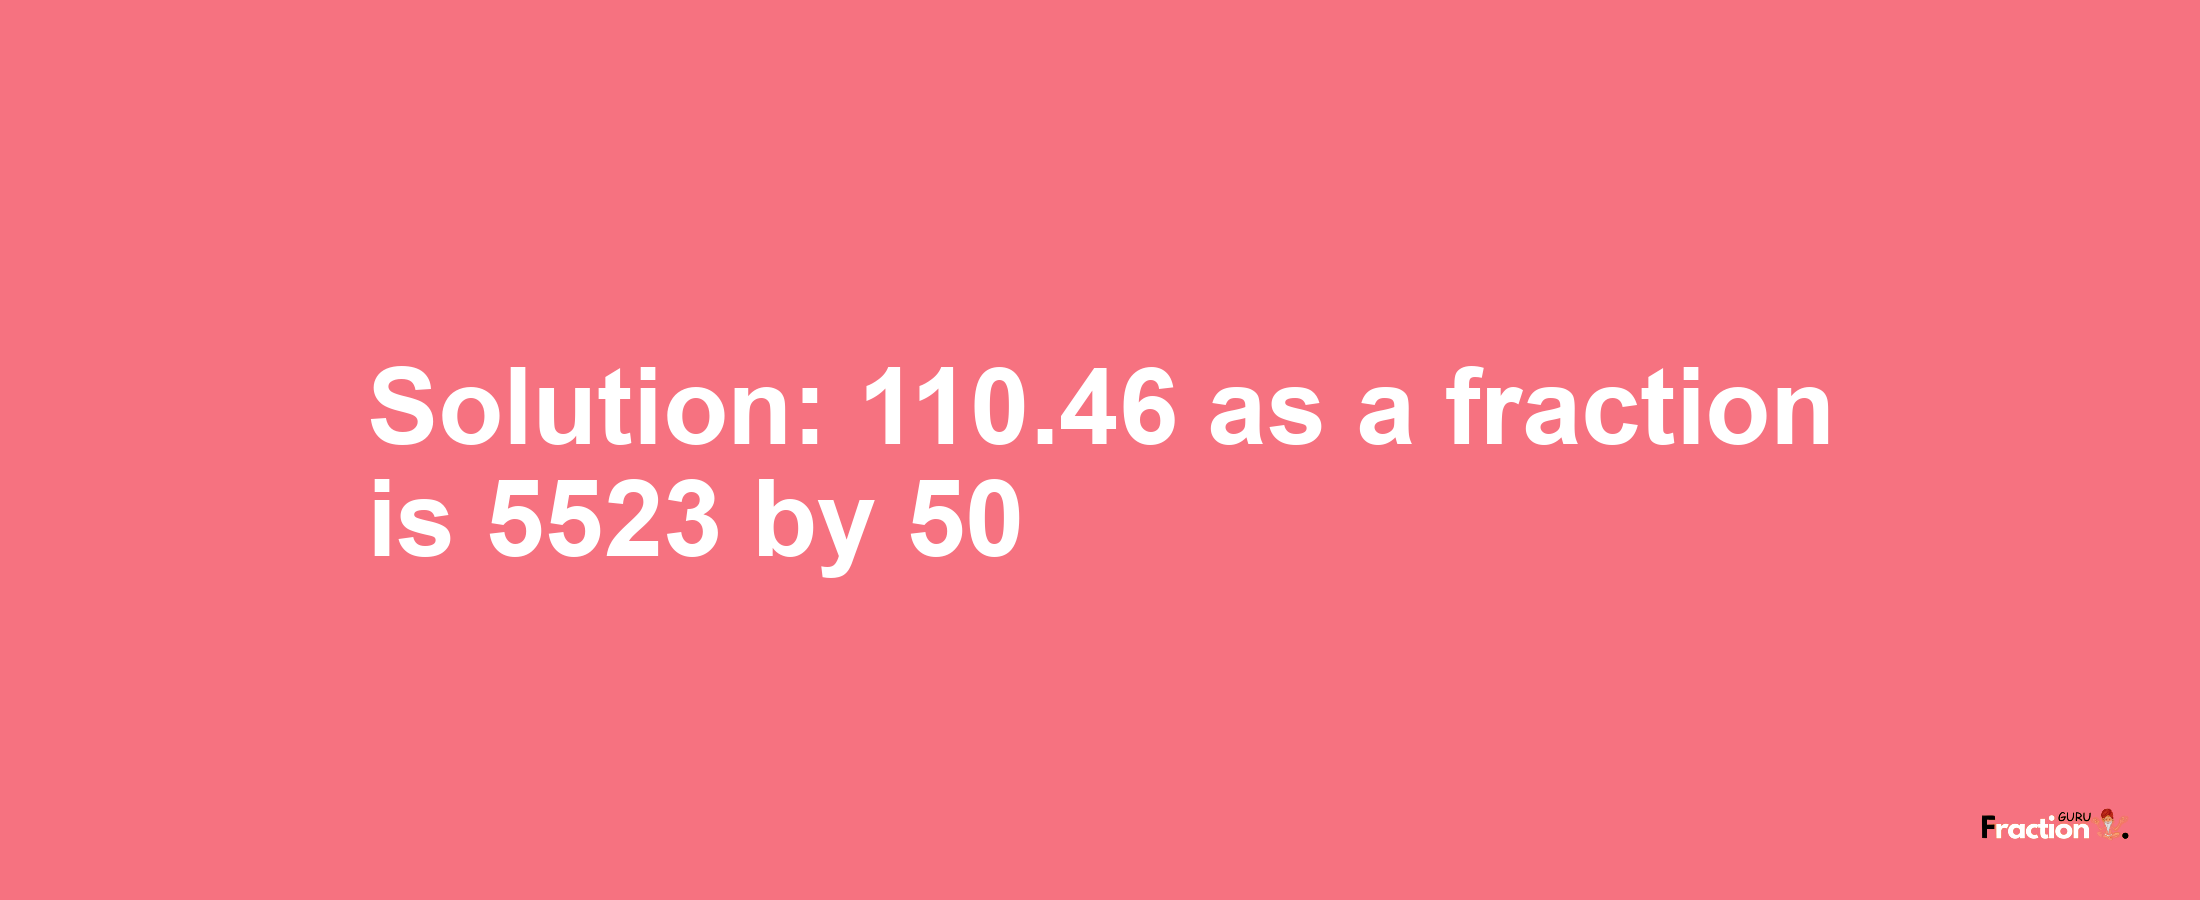 Solution:110.46 as a fraction is 5523/50